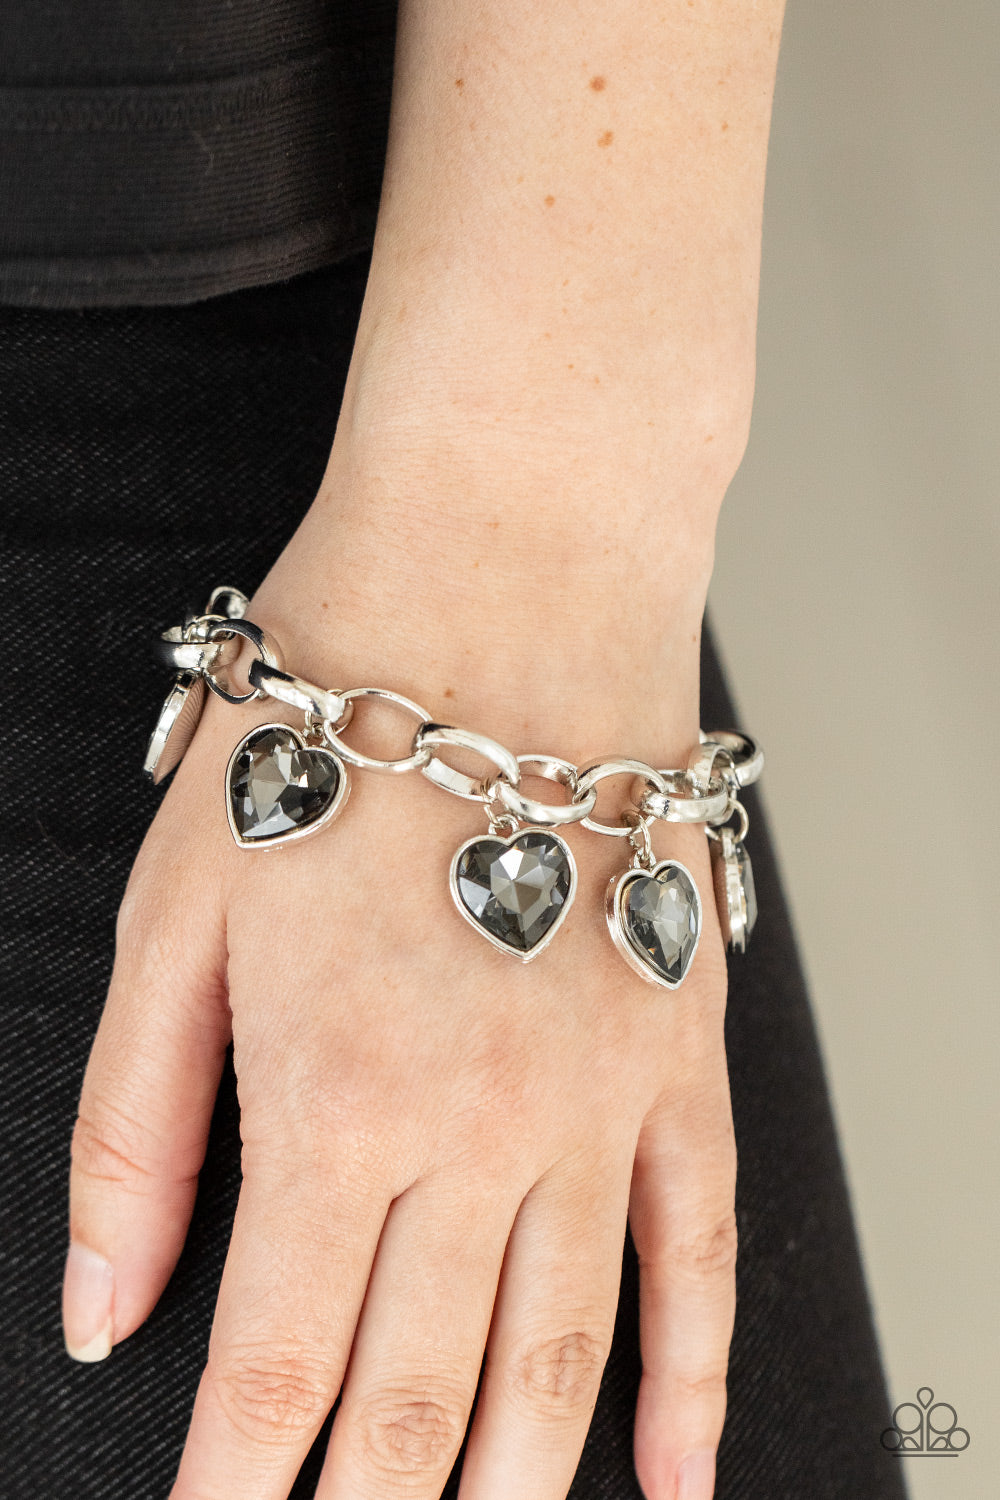 Candy Heart Charmer Silver Bracelet - Paparazzi Accessories  Smoky heart-shaped gems are encased in sleek silver frames that swing from an oversized silver chain, creating a sparkly fringe around the wrist. Features an adjustable clasp closure.  All Paparazzi Accessories are lead free and nickel free!  Sold as one individual bracelet.